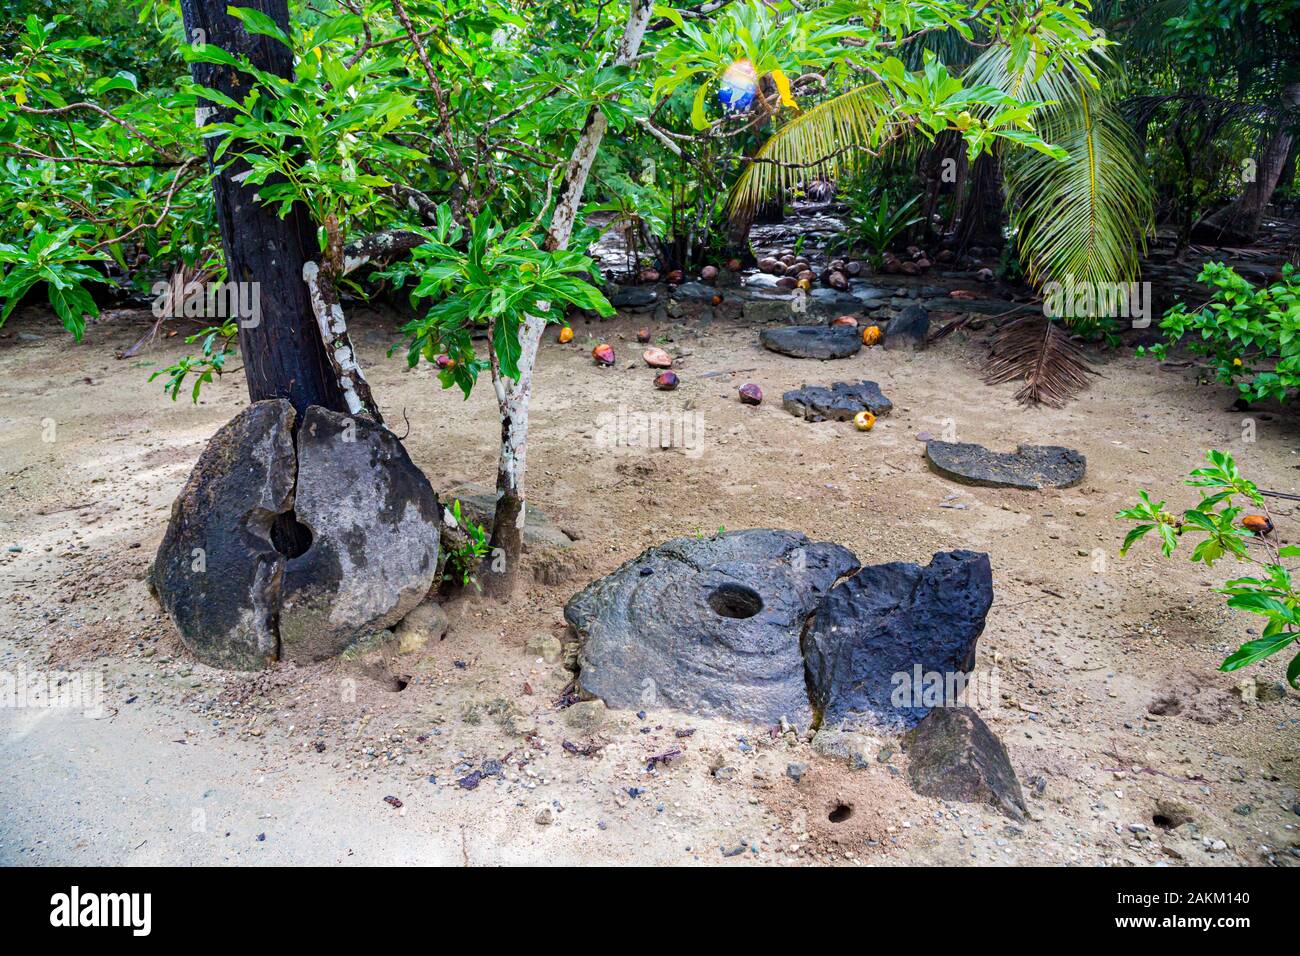 Two giant broken prehistoric megalithic stone coins or money rai, lying in the sand hidden under trees in jungle. Yap island, Federated States of Micr Stock Photo